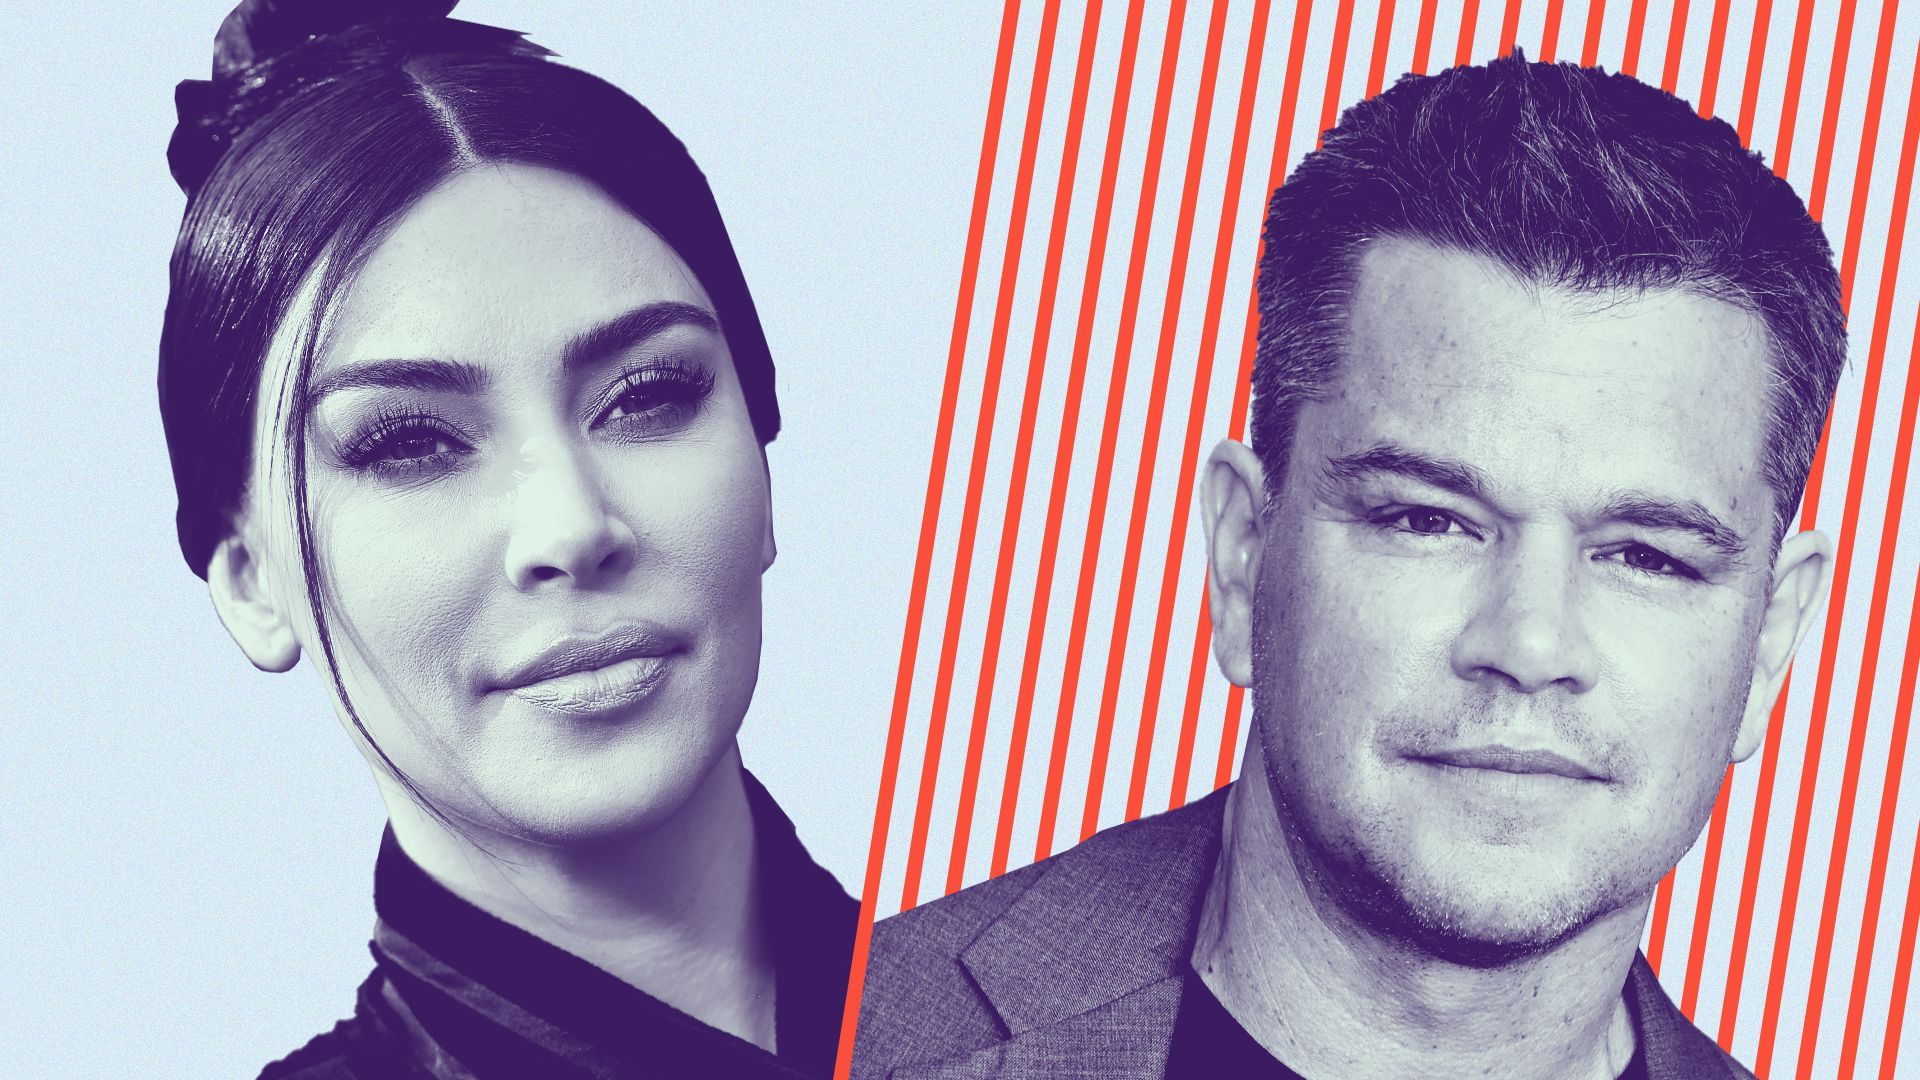 Photo illustration of Kim Kardashian and Matt Damon side by side with only Damon backed by graphic lines